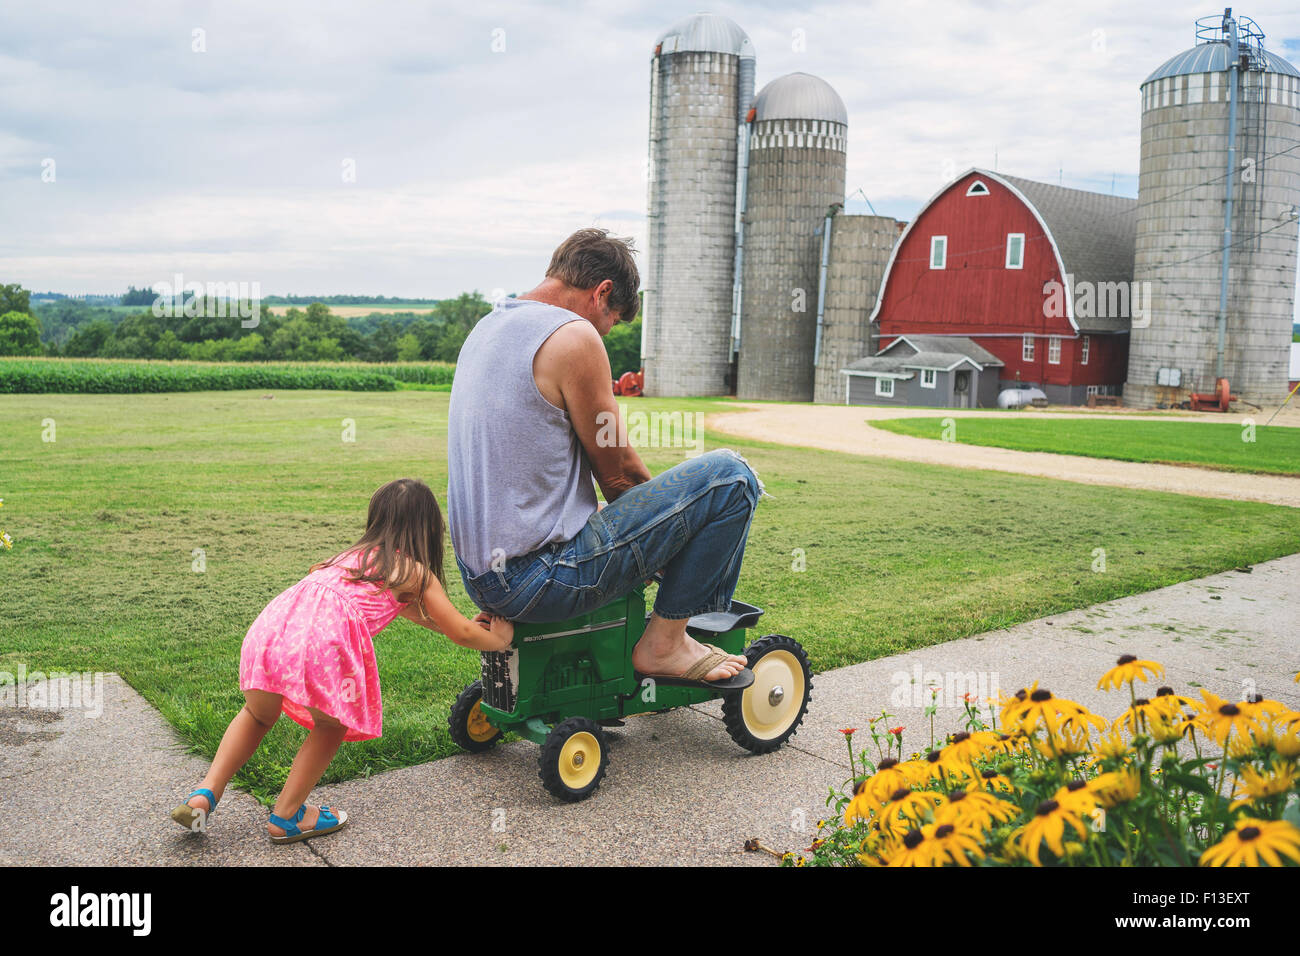 Girl pushing her father on a toy tractor on a farm, USA Stock Photo